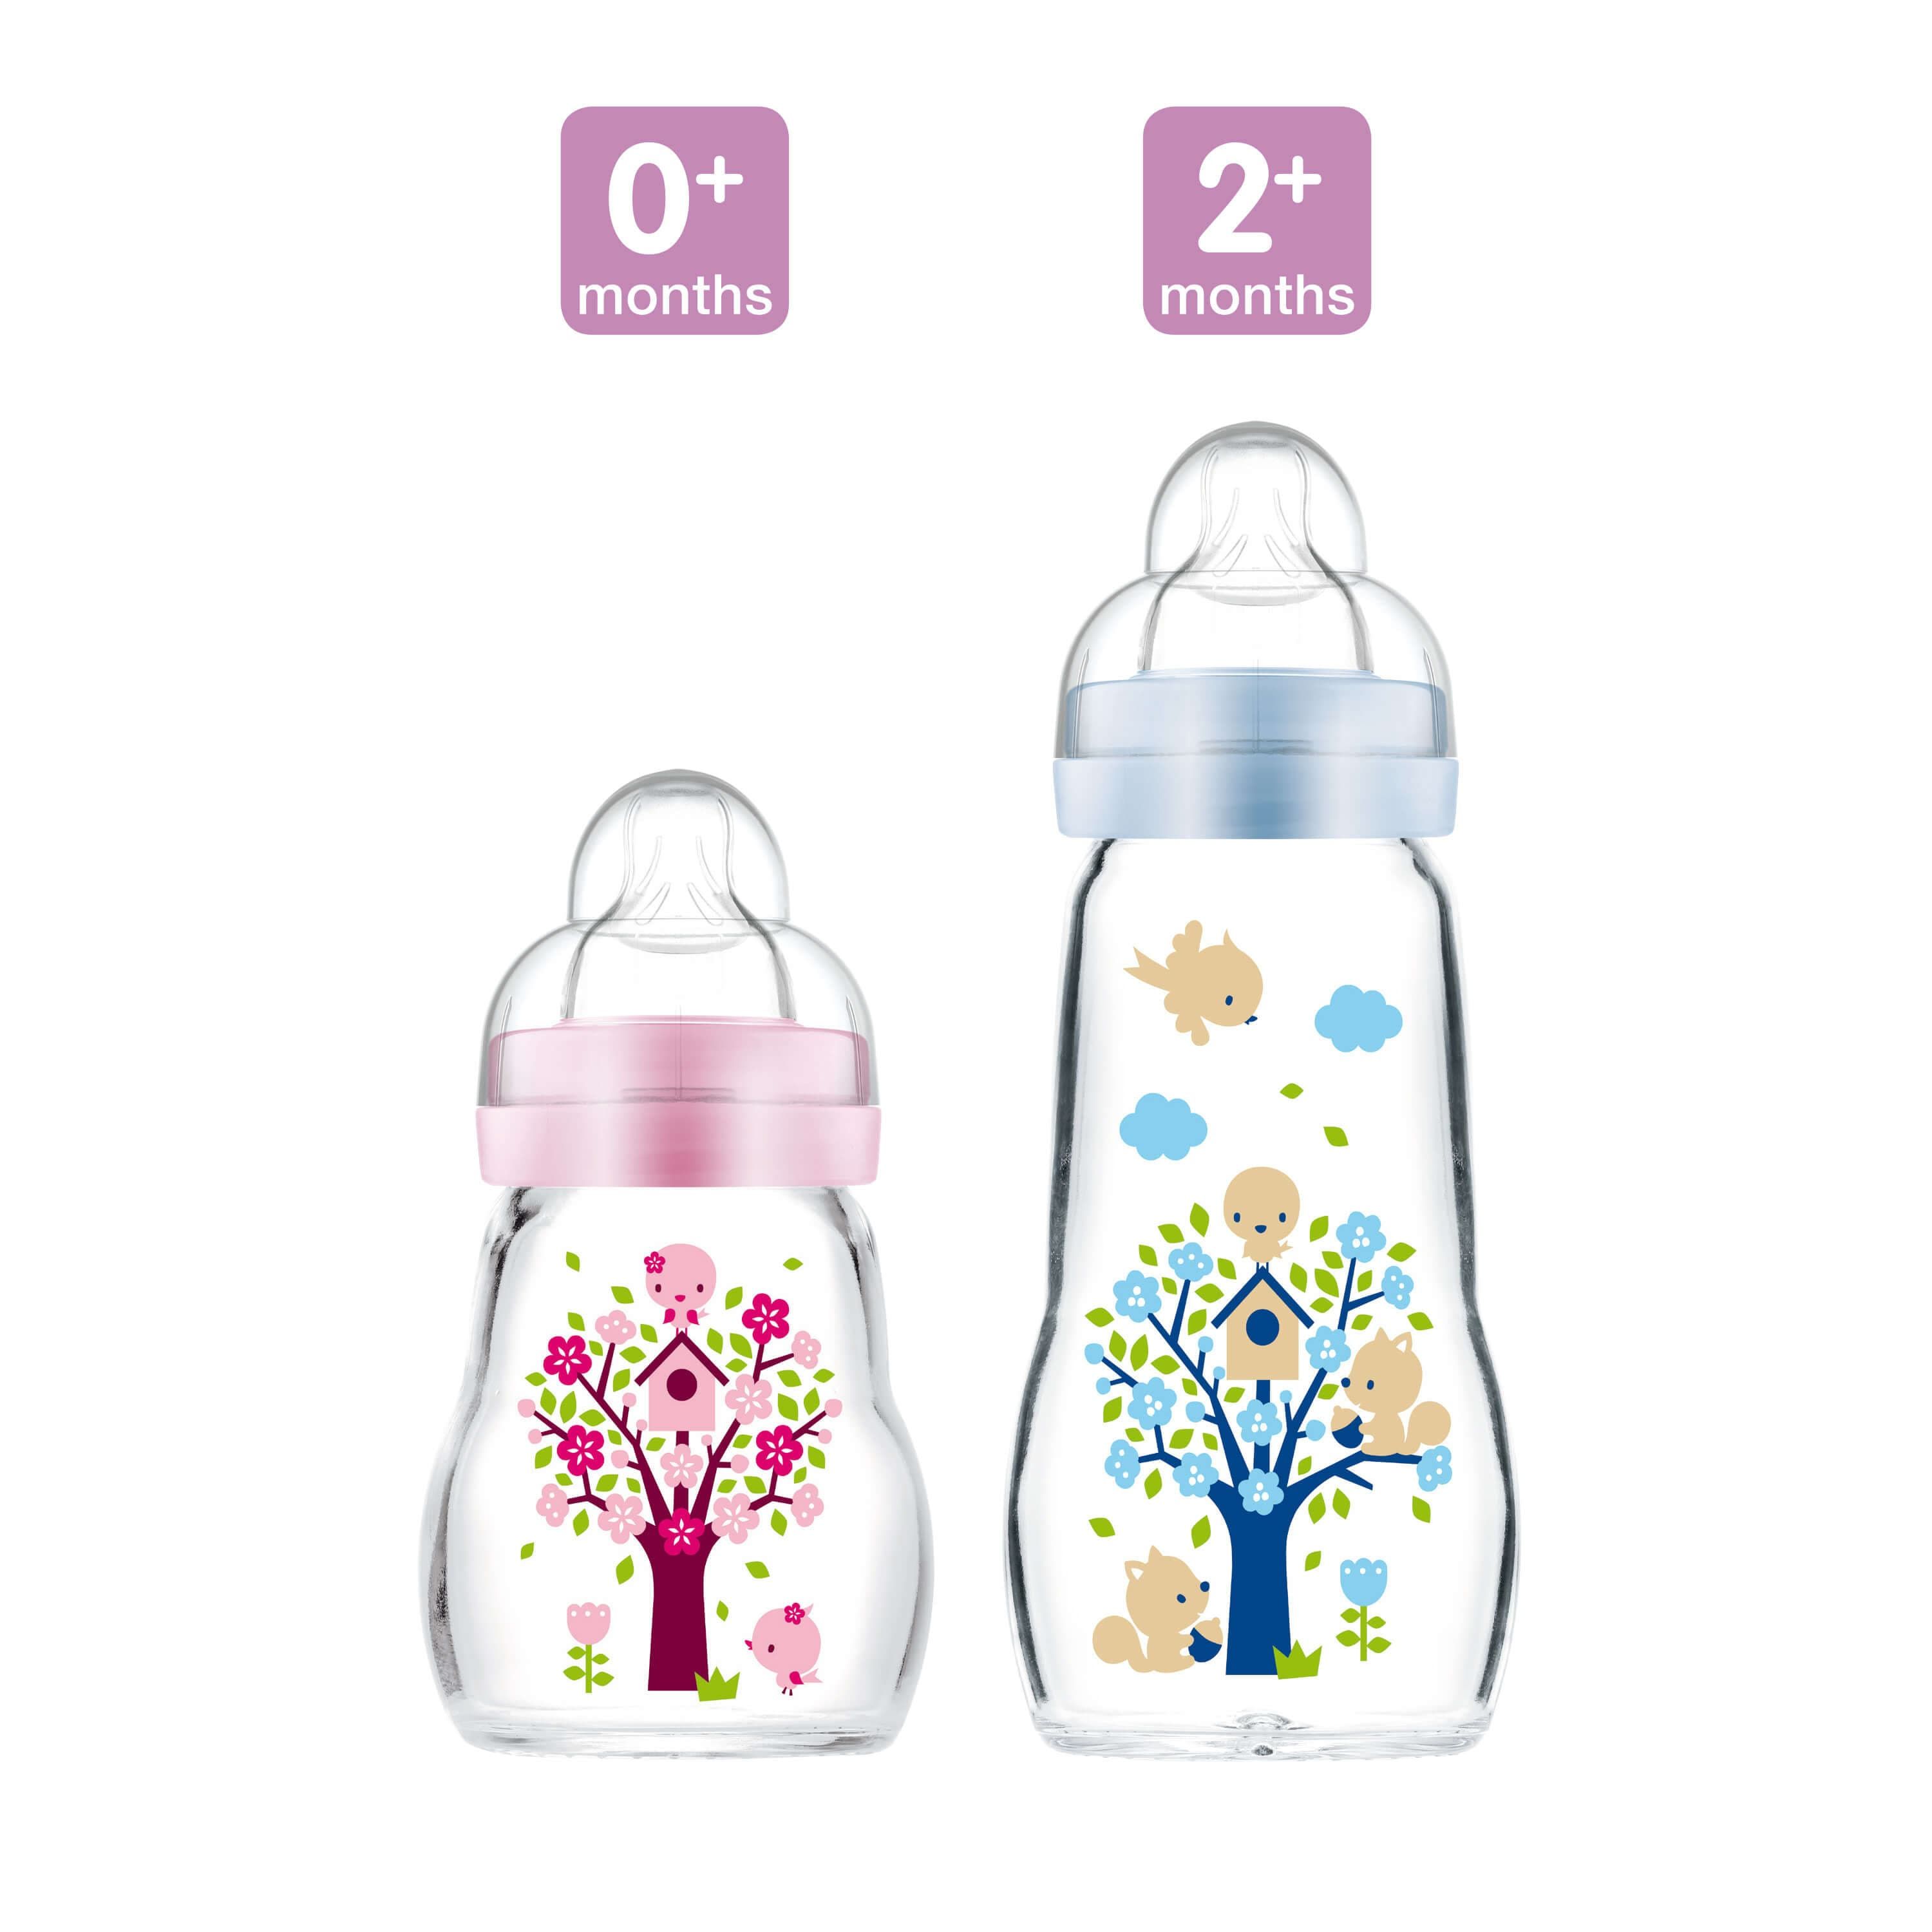 Find Uniquely Designed glass baby feeder On Offer 